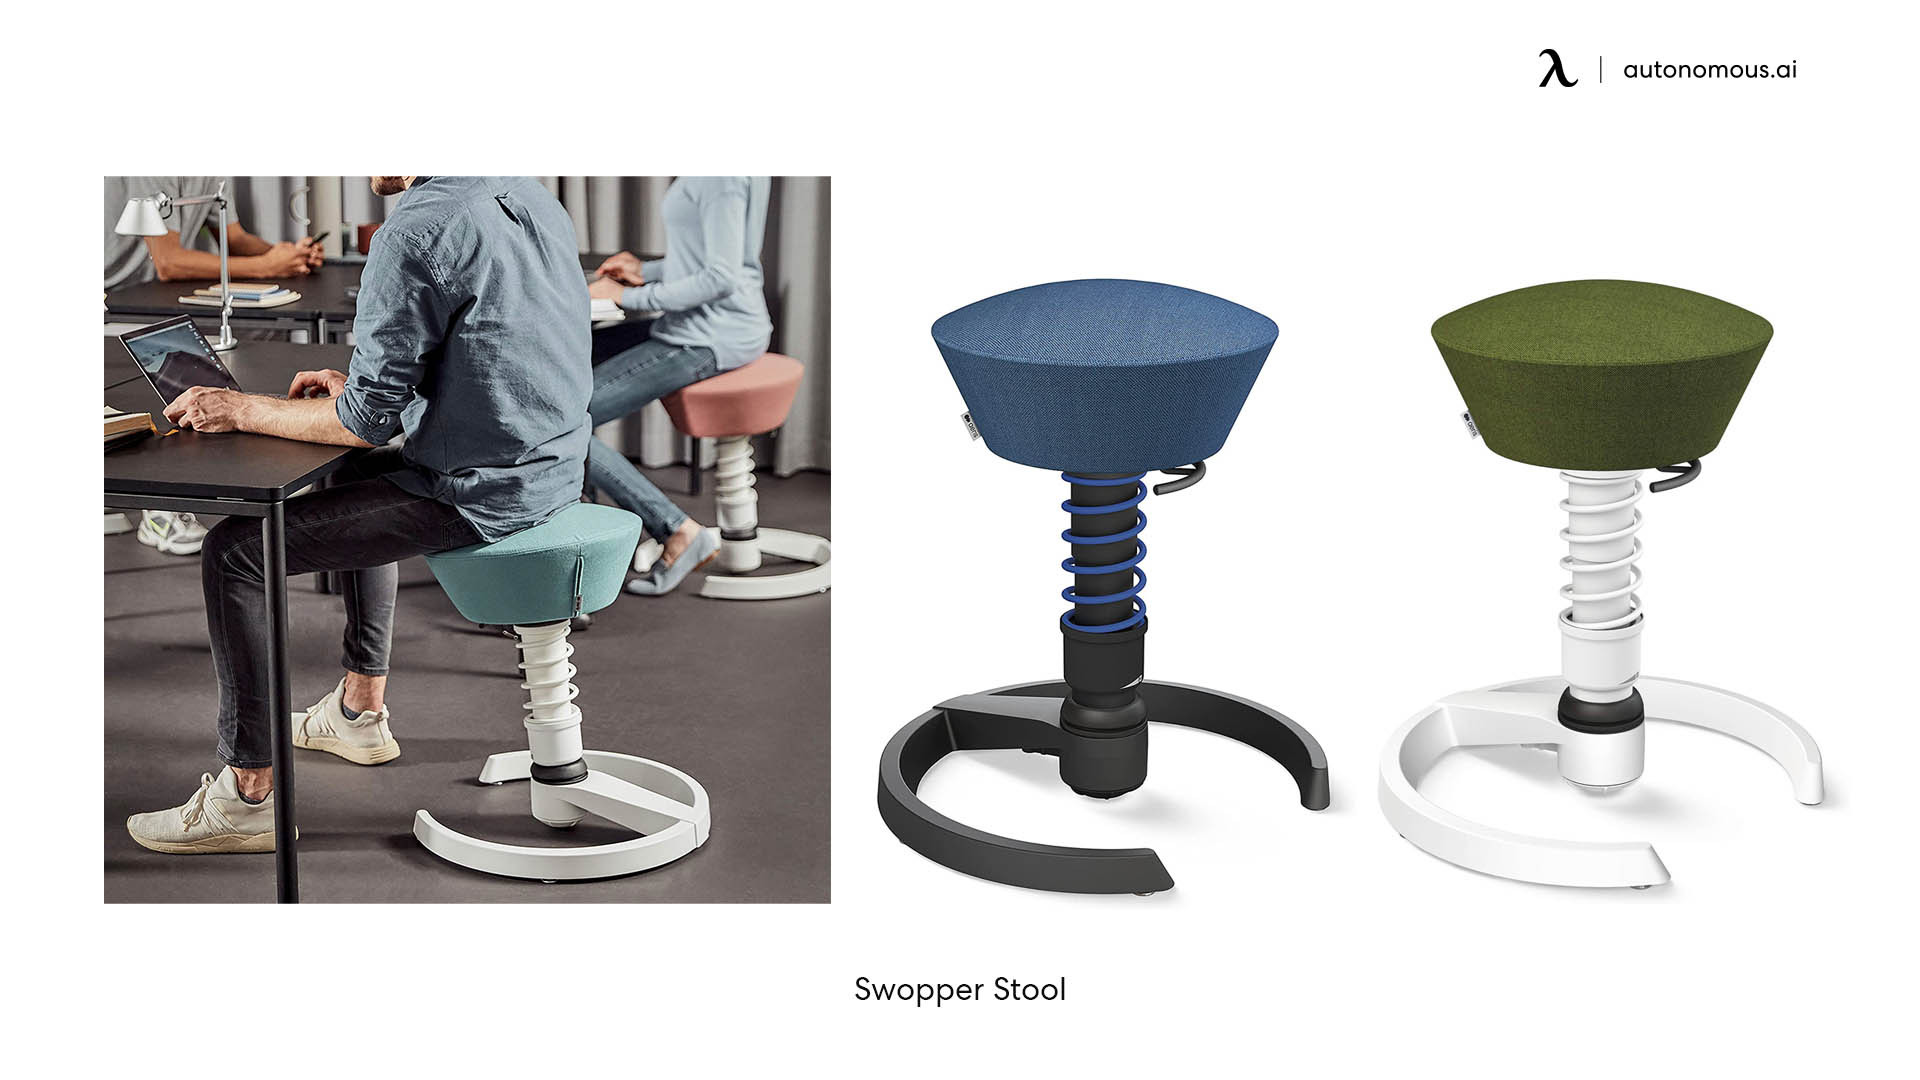 Swopper Stool active chair